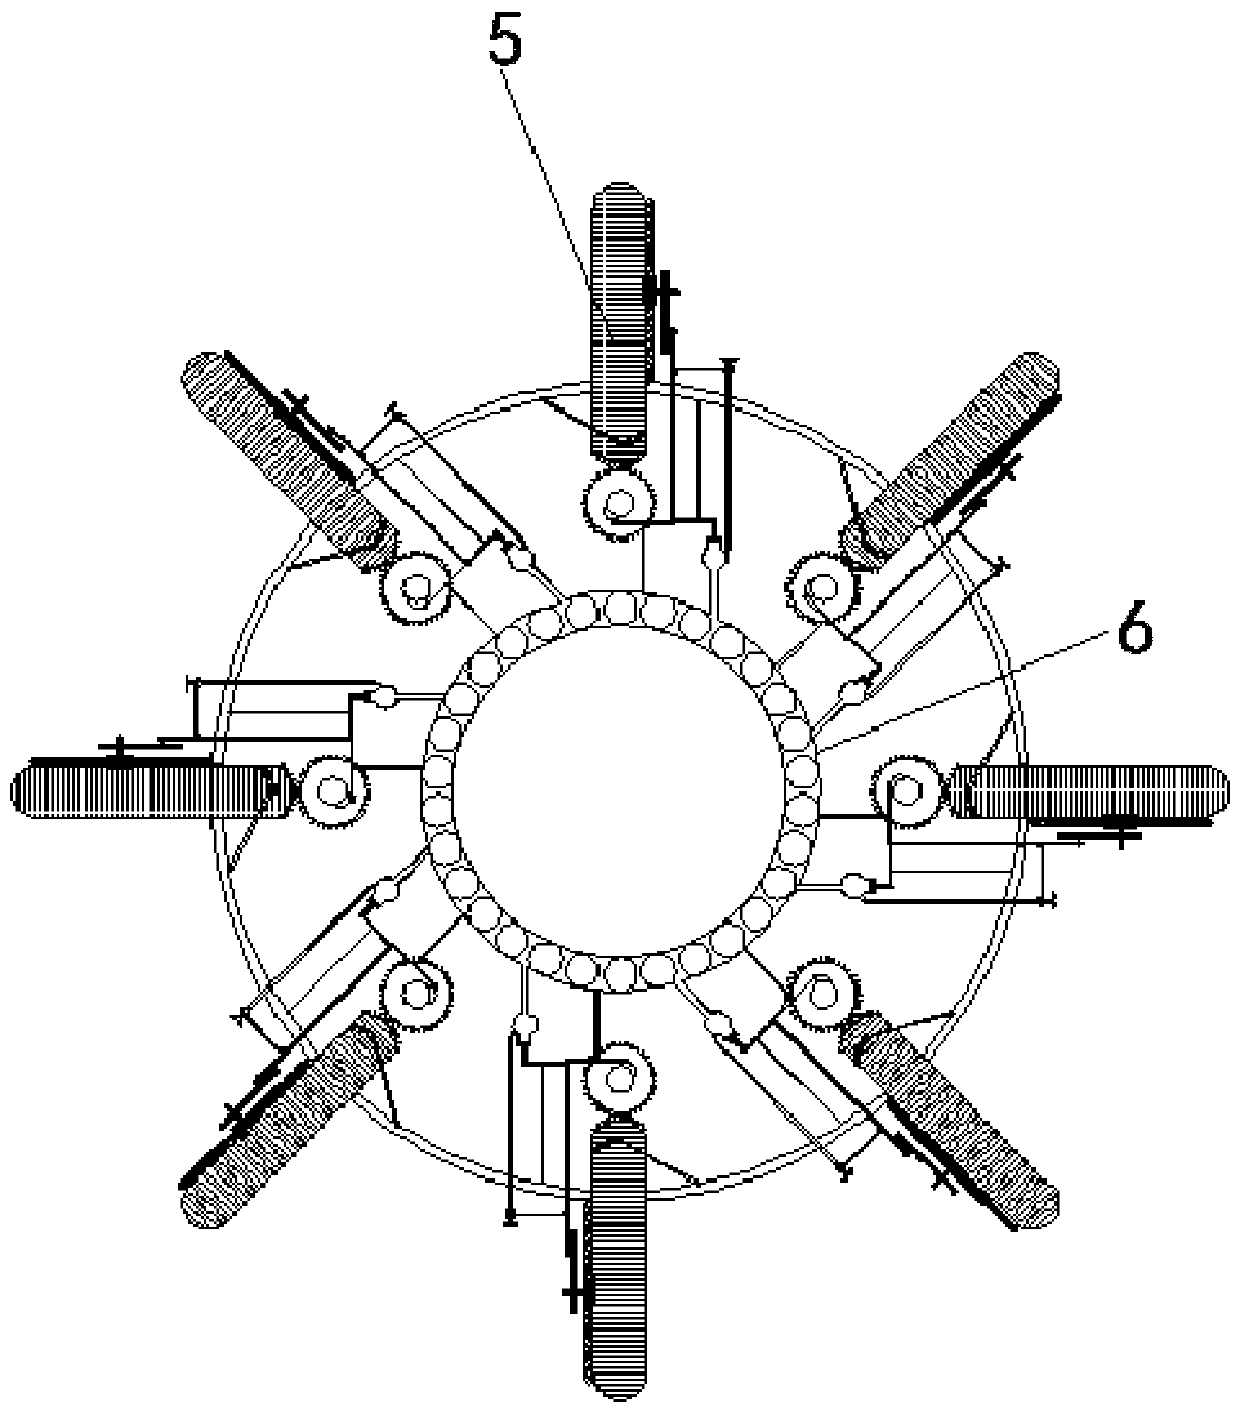 Water turbine capable of automatically descaling back surface of wheel fan